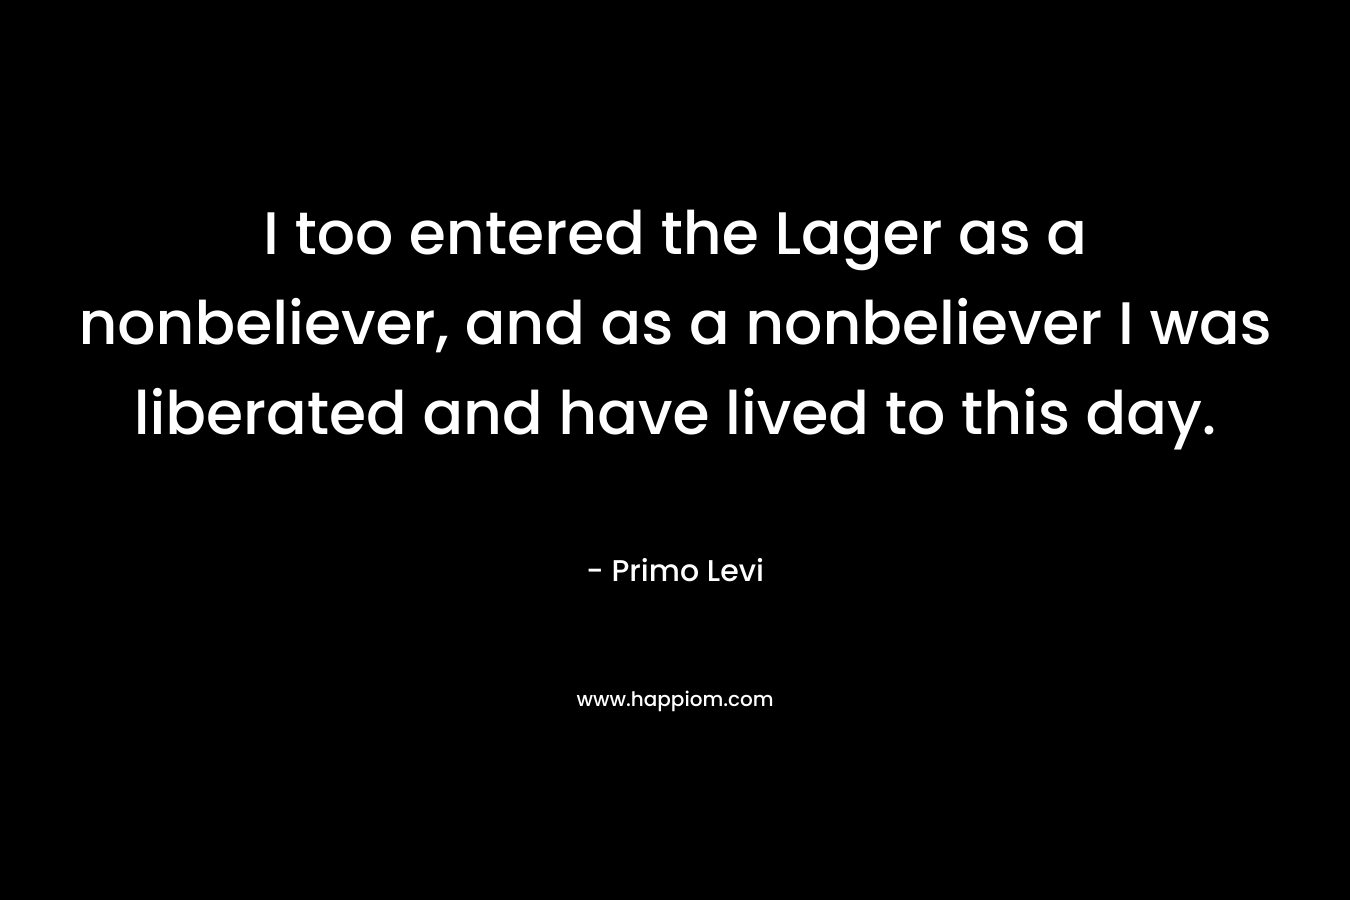 I too entered the Lager as a nonbeliever, and as a nonbeliever I was liberated and have lived to this day. – Primo Levi